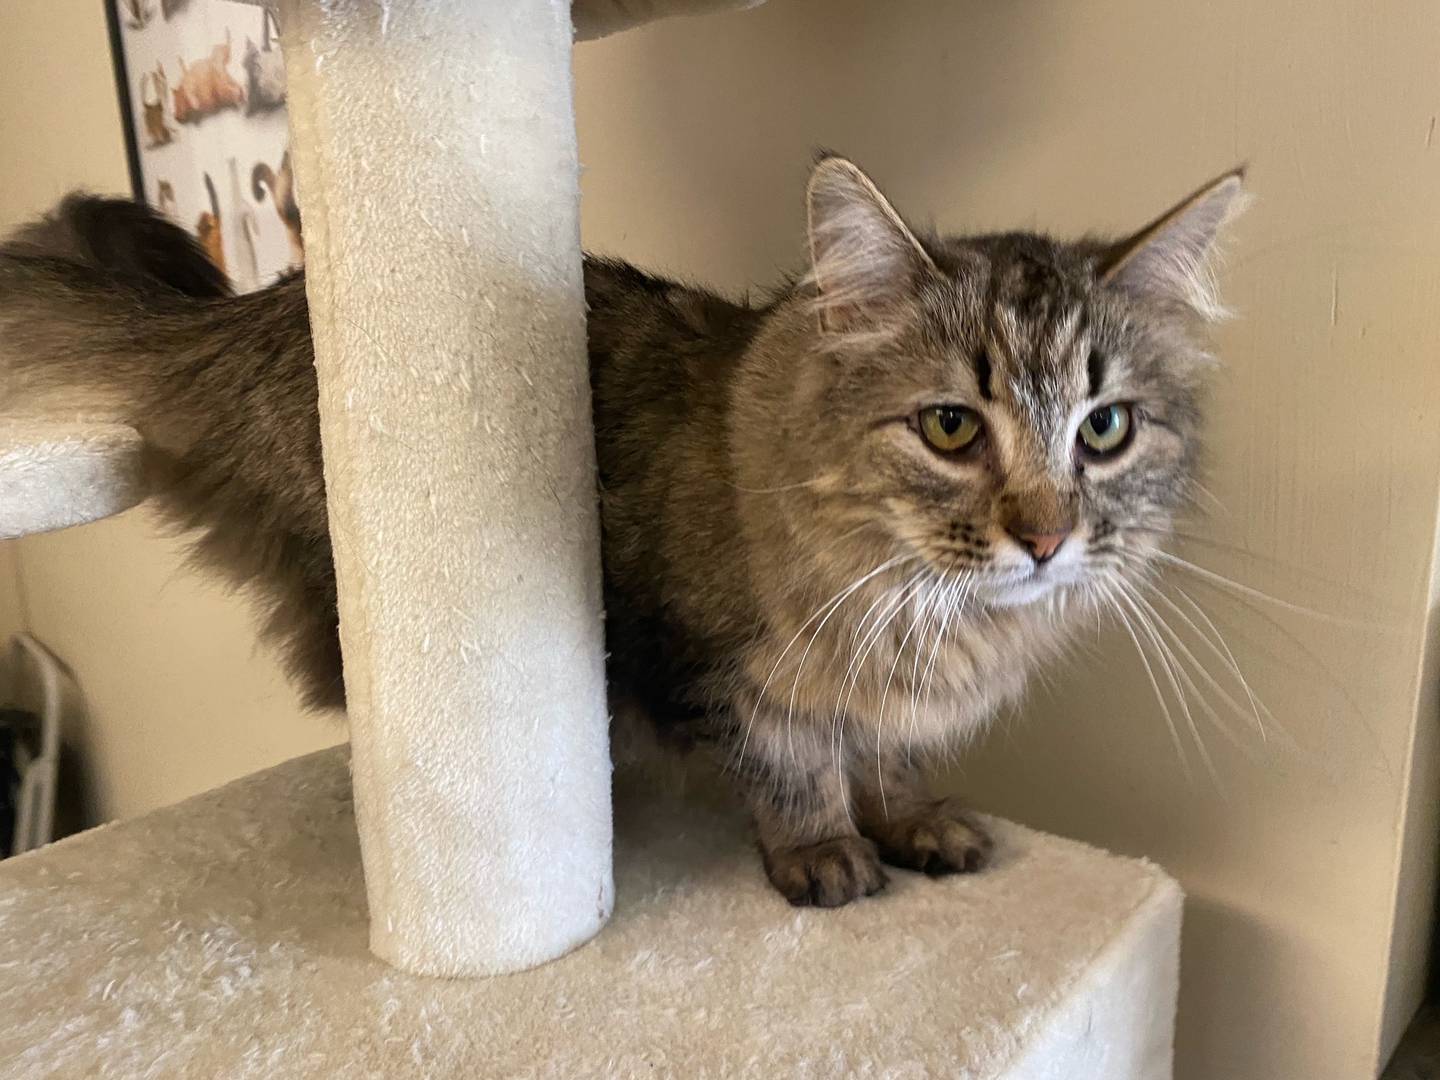 Lisby is a 4-year-old tabby. She is very sweet and loves affection. Lisby is not fond of other cats and would do best in a single-family home. To meet Lisby, visit justanimals.org or call 815-448-2510.